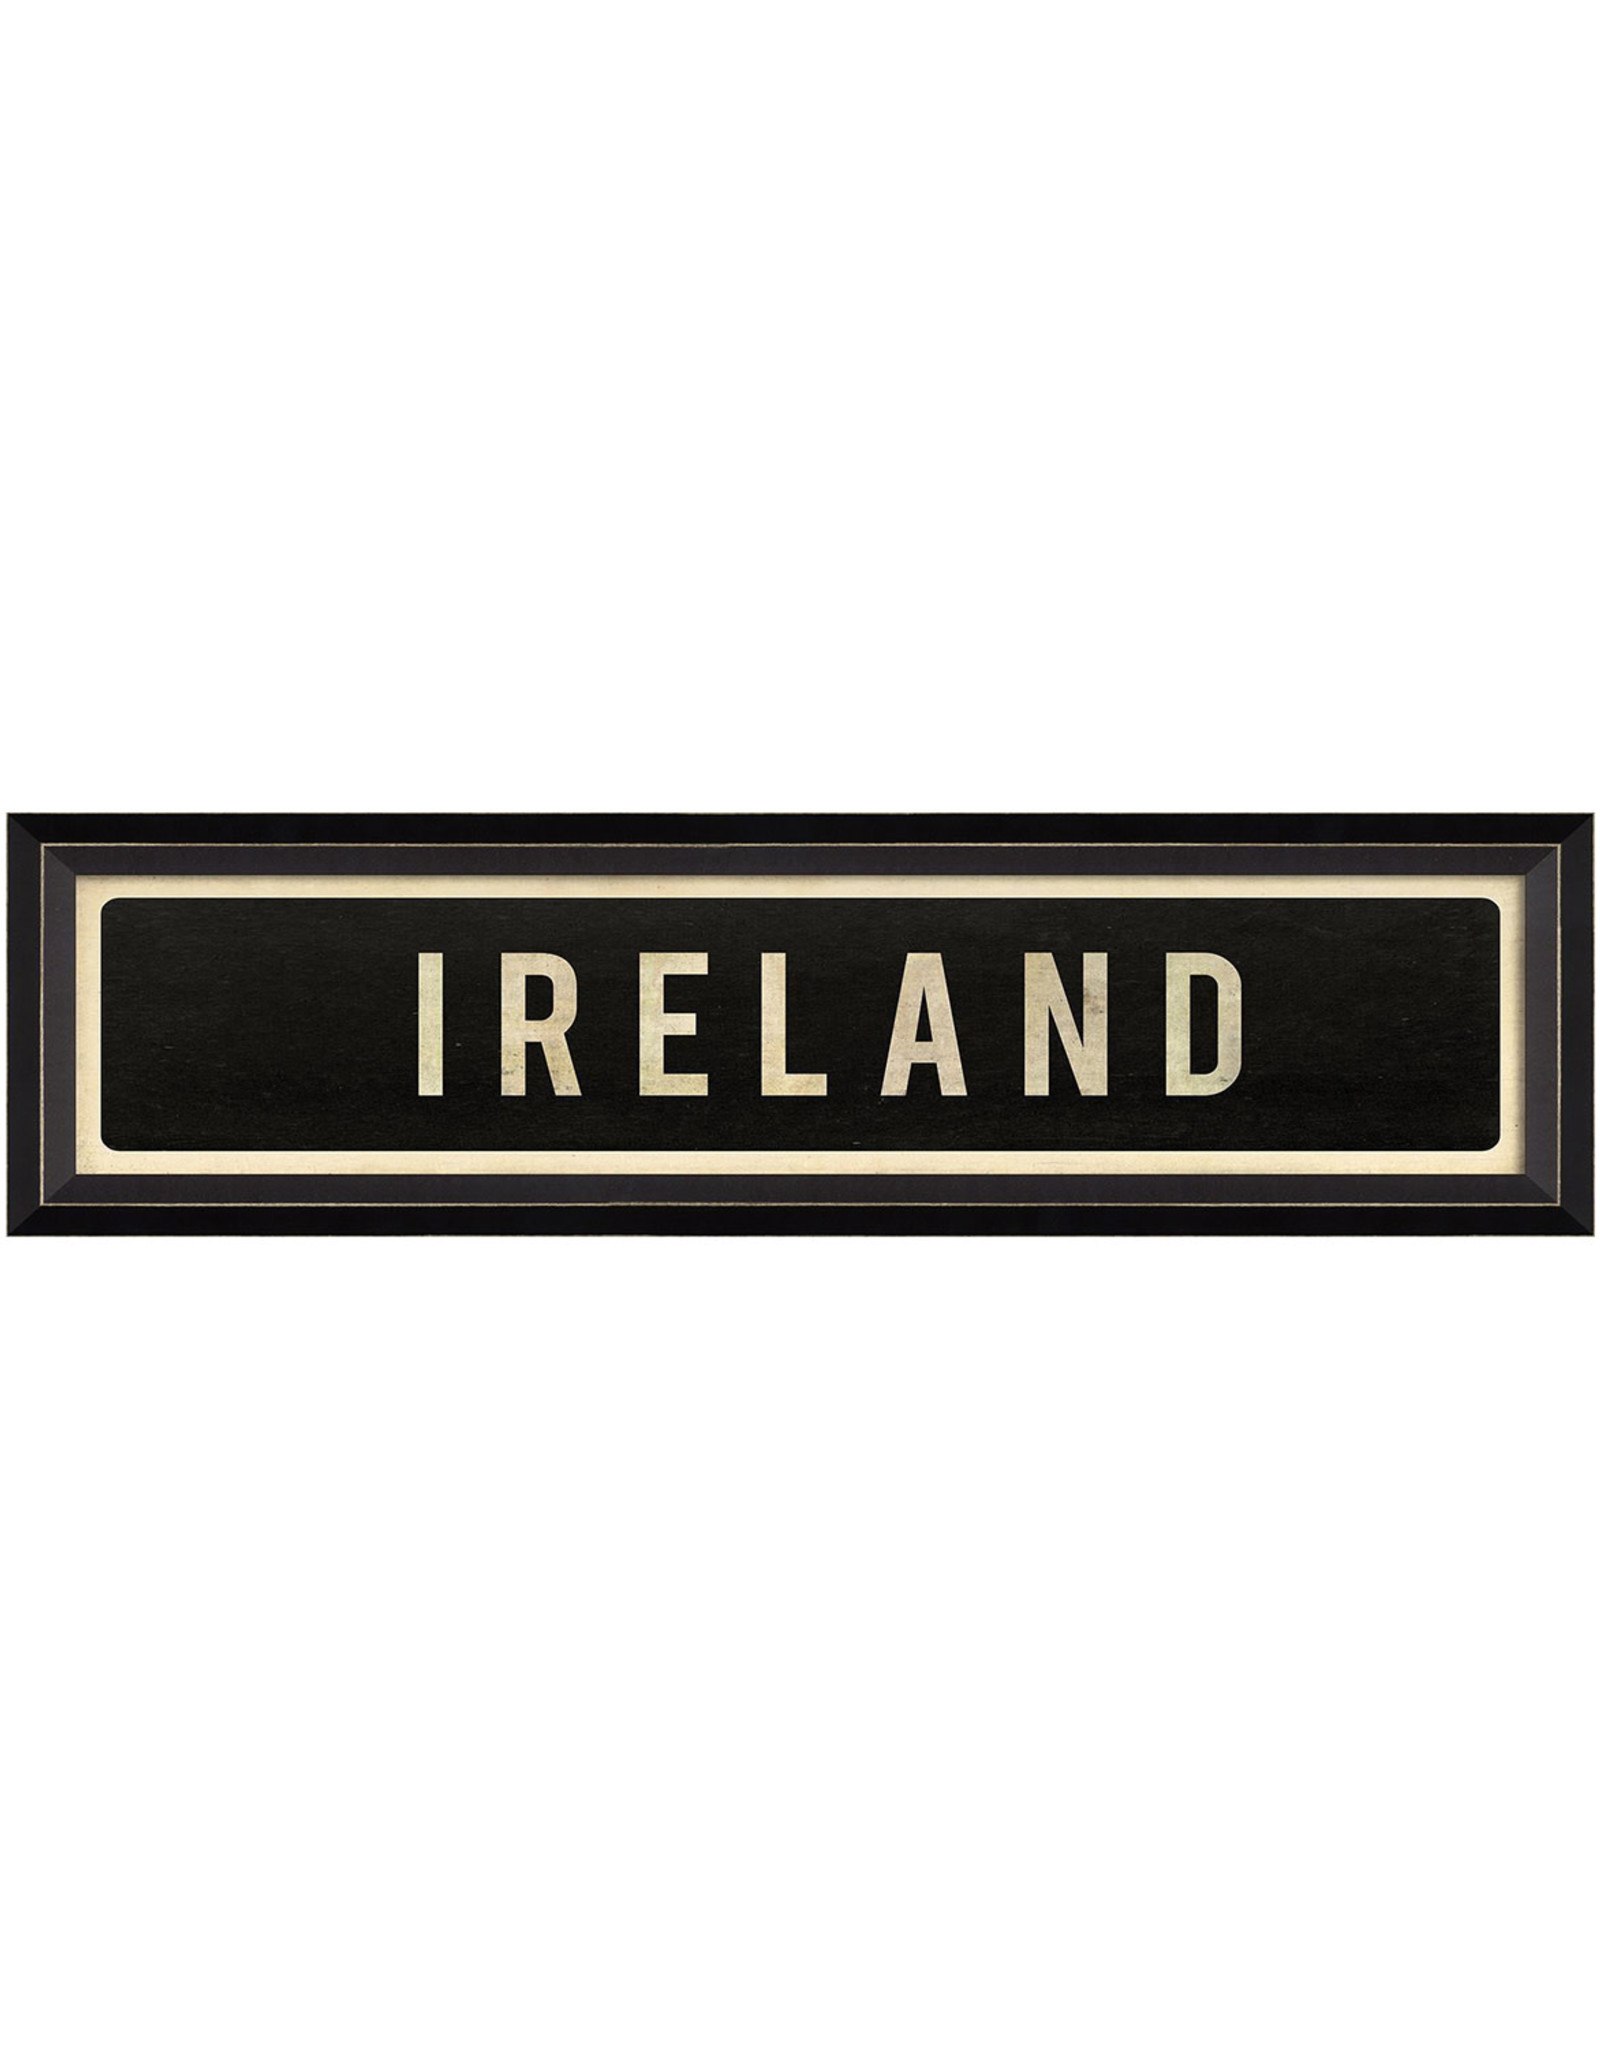 IRELAND Framed Picture - 7.625" x 25.625"